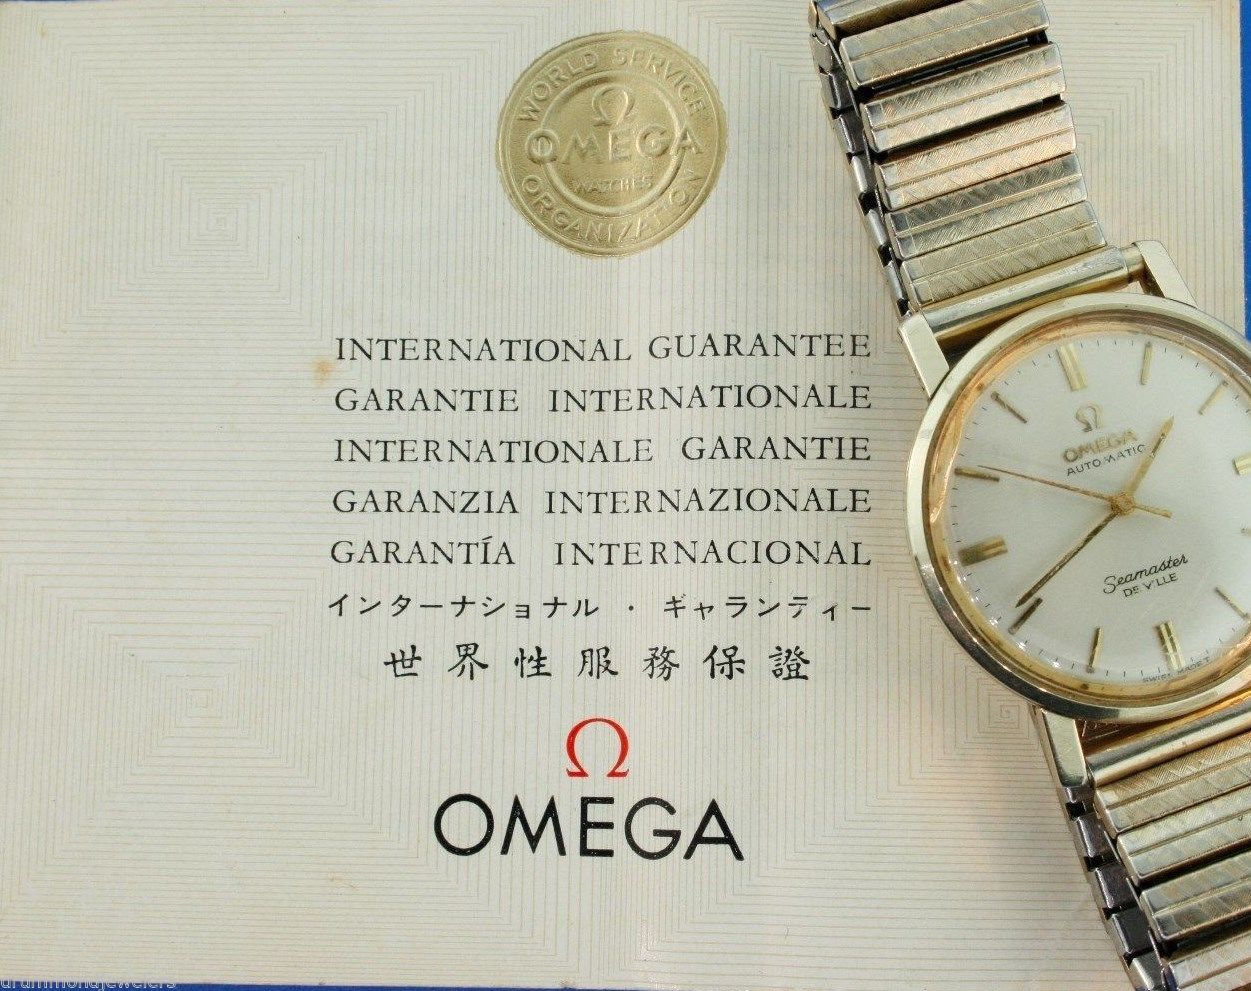 How I Serviced My Own Watch: A Vintage Omega Seamaster De Ville